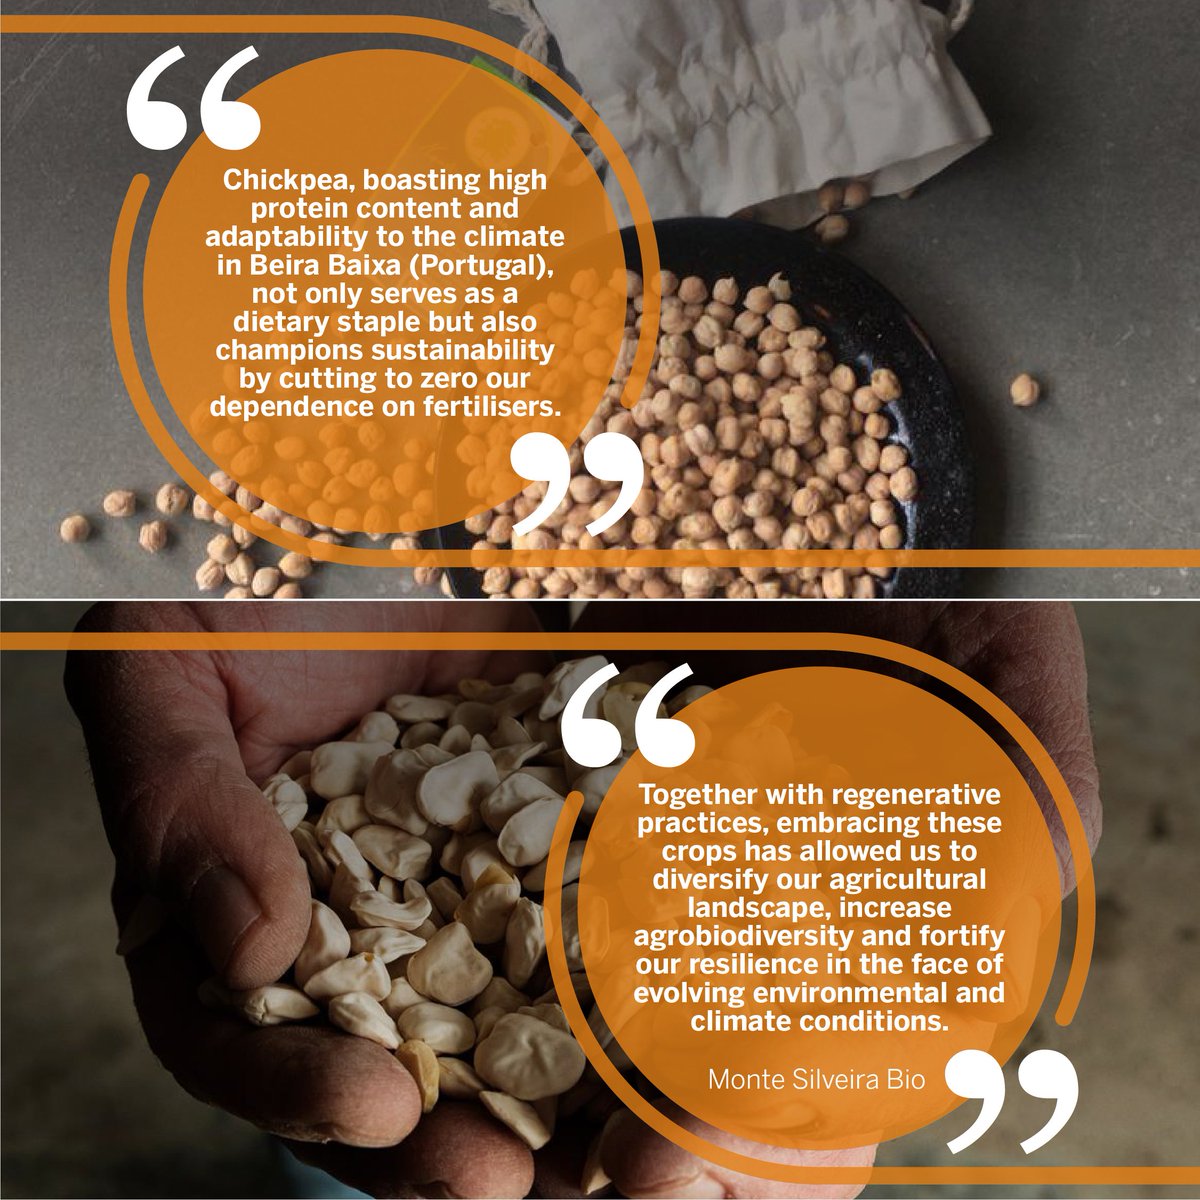 Monte Silveira Bio is the latest addition to our growing family of Participatory Farmers! Swipe to learn about their invaluable contribution to increase agricultural resilience through their work with cowpea and chickpea crop varieties. #RADIANT #ParticipatoryFarmers #Farming